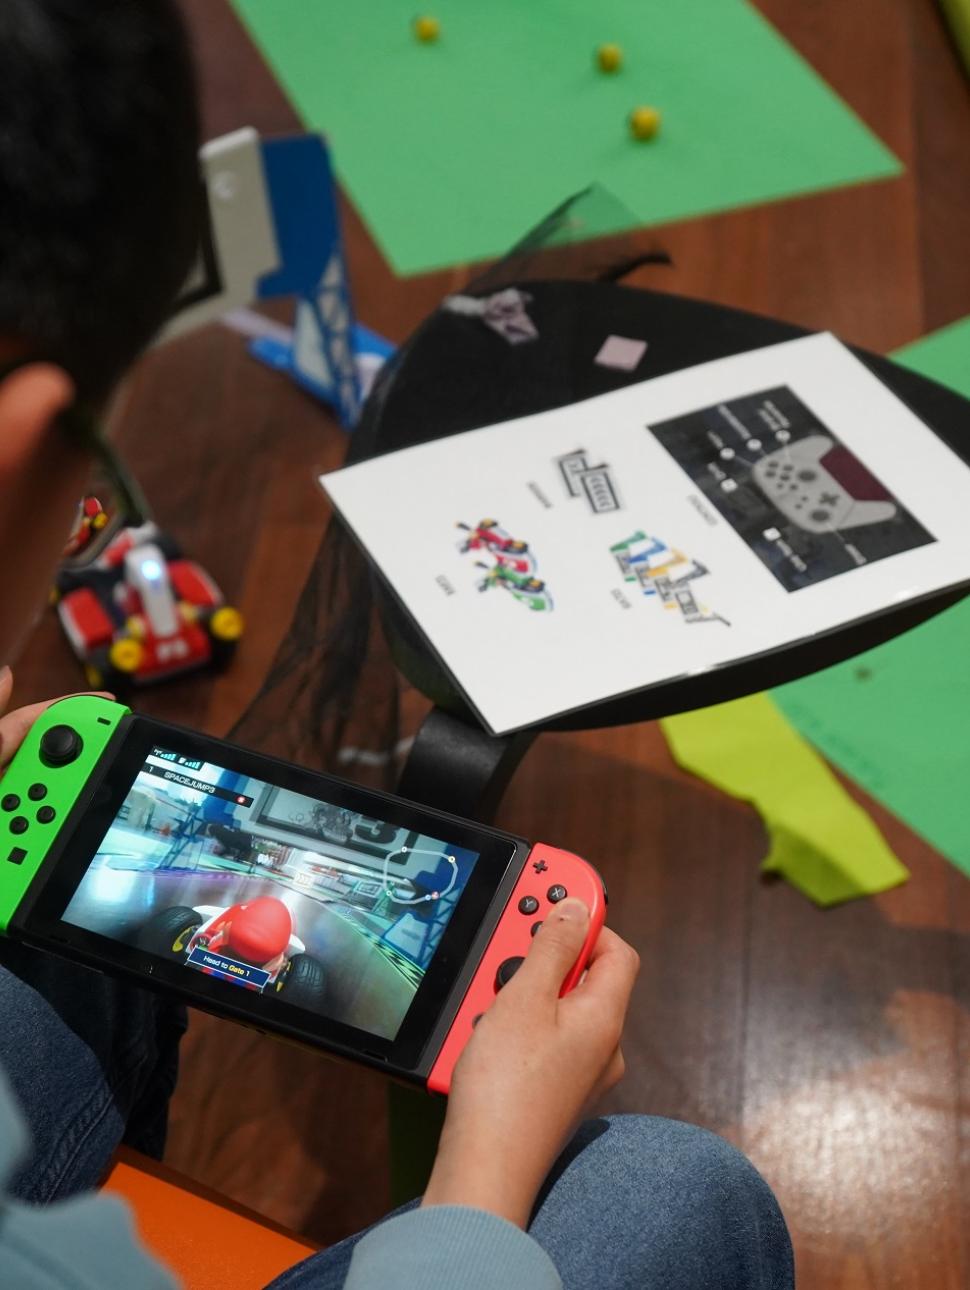 Image shows a boy using a Nintendo Switch to play the game of Mario Kart